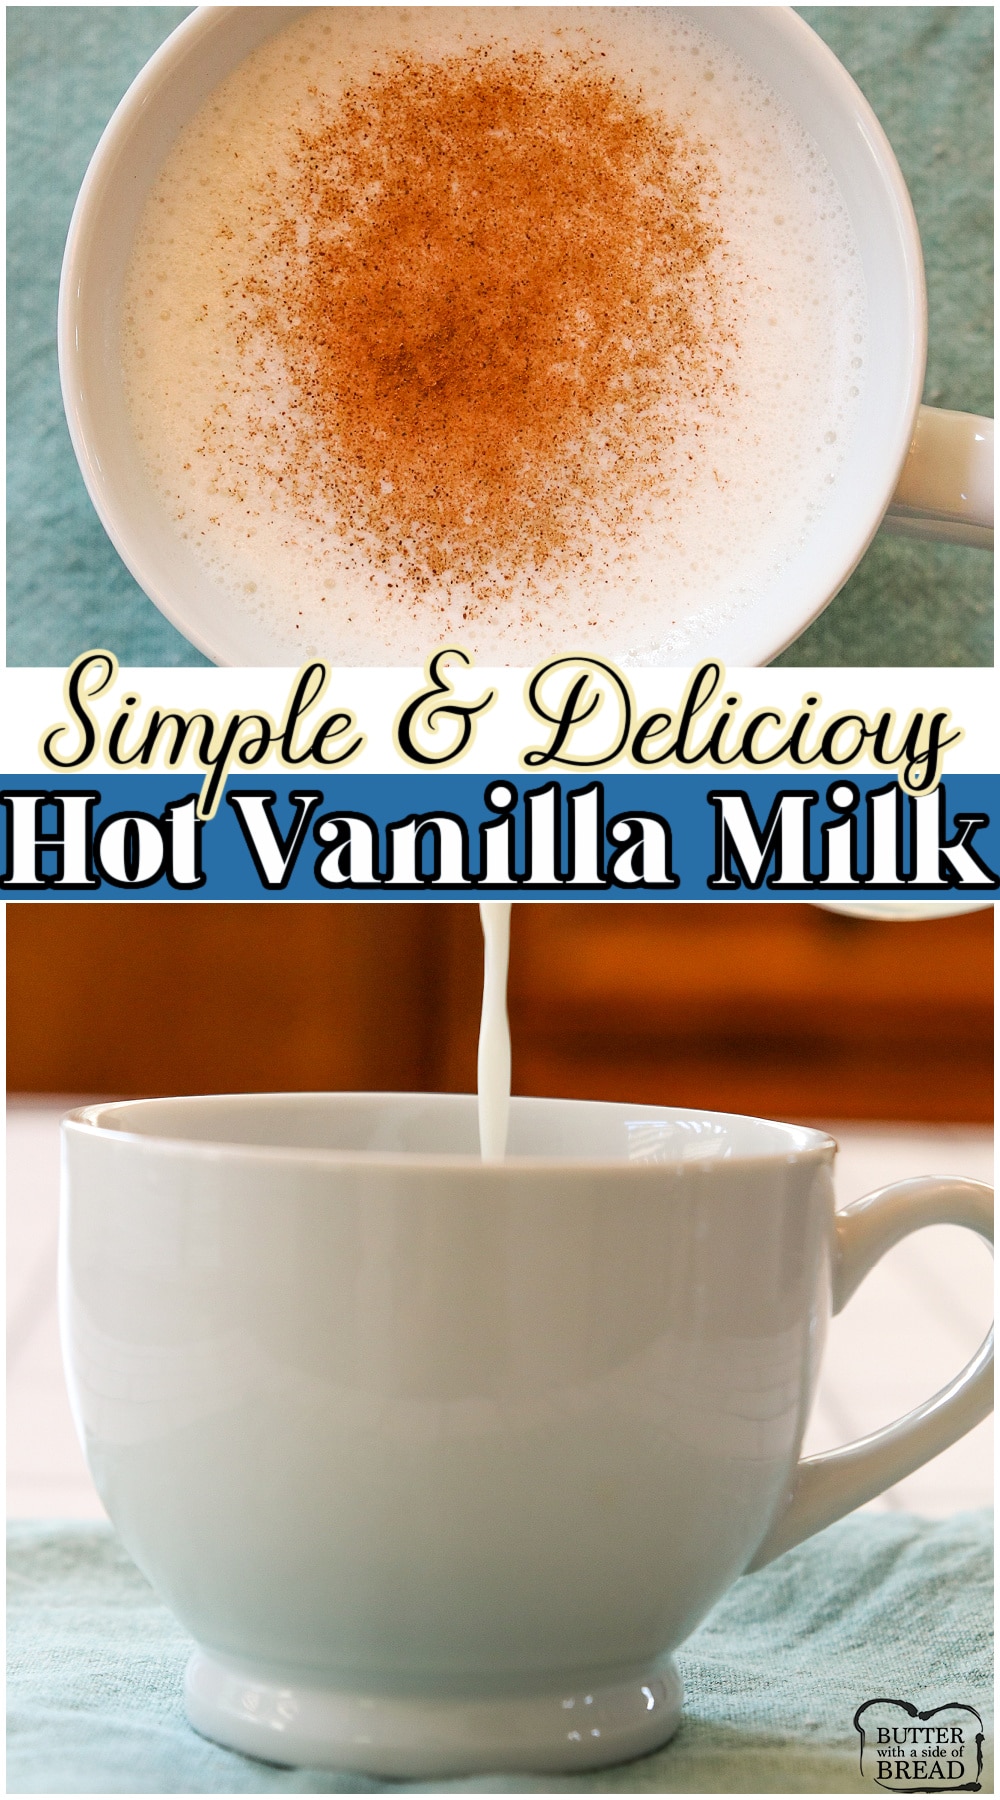 Hot vanilla milk is a delicious warm beverage recipe that our family adores! It's a perfectly sweet, comforting drink that's a nice alternative to hot chocolate. Great for bedtime & so easy to make!